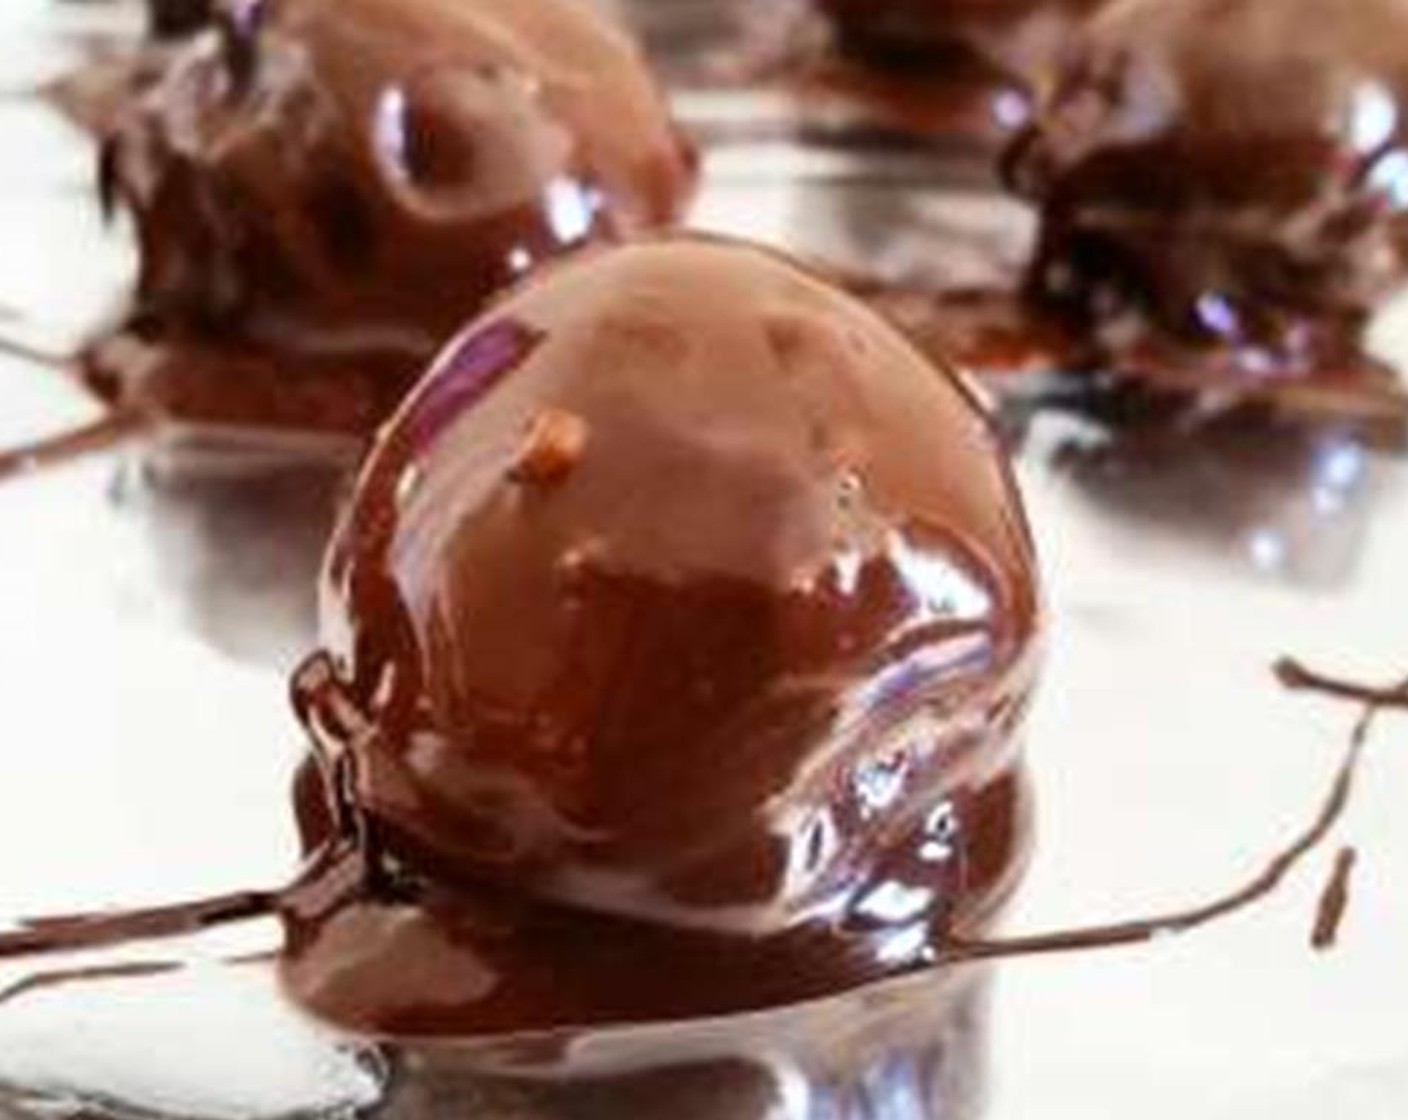 step 4 Dip the peanut butter balls into the chocolate and coat them completely. Remove from chocolate and allow to set for 20-30 minutes. Enjoy!